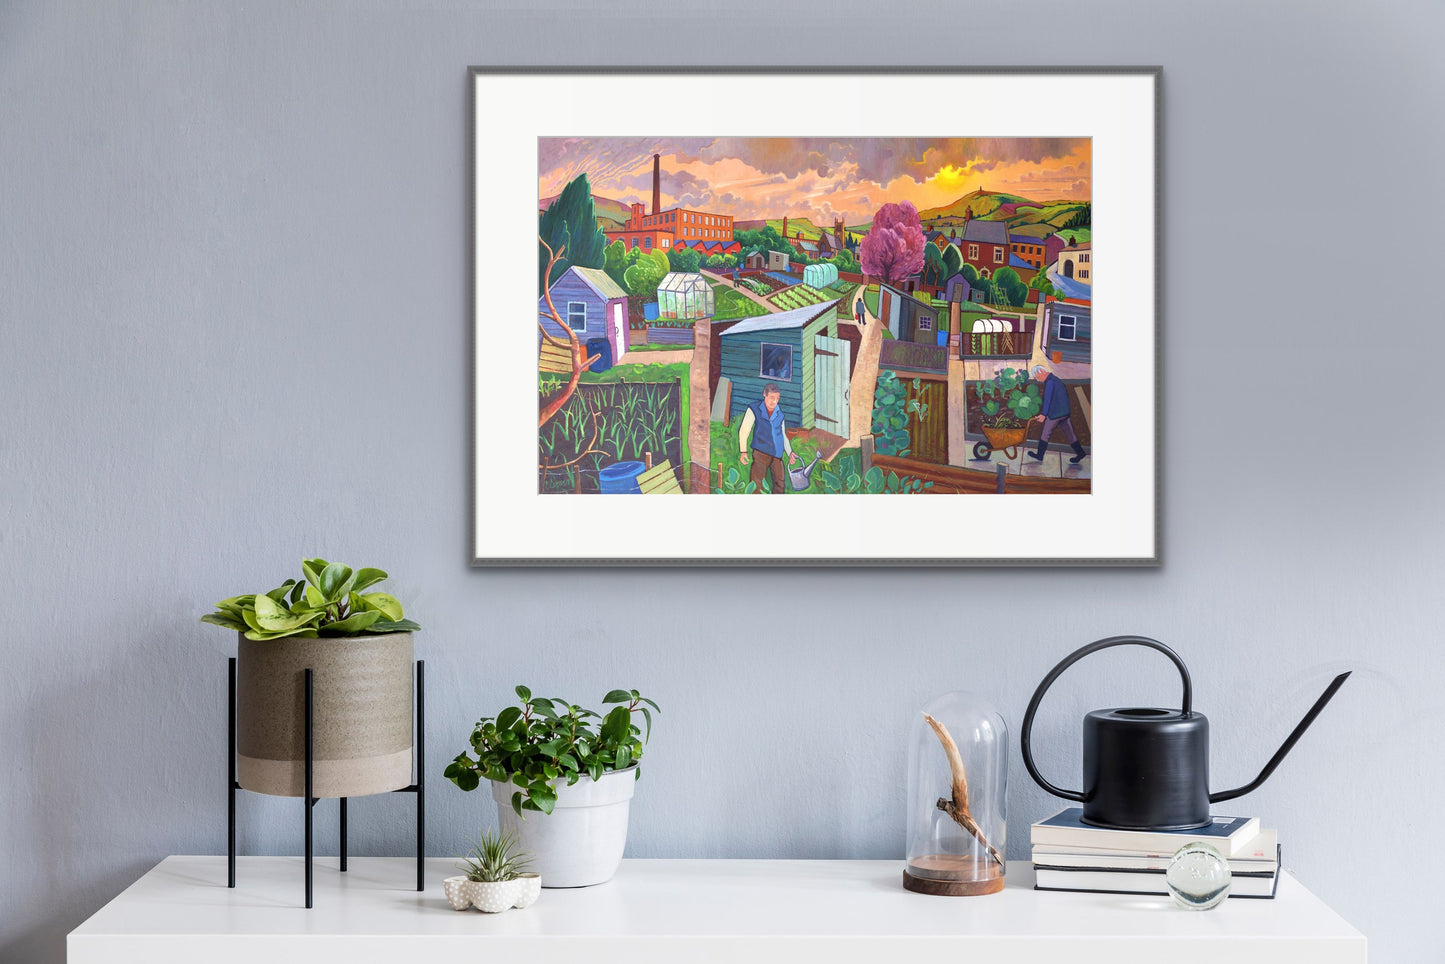 Reproduced from the original oil painting completed in 2019.  A detailed scene combining elements of beautiful landscape surrounding an allotment,  plot holders tending to their prize vegetables and flowers on a summers day at sunrise.  Actual size of artwork 54cm x35cm      Signed and embossed     Unique certificate of authentication     Limited run of 50     Printed on 300gsm archival quality paper using lightfast inks     Tube rolled perfect for worldwide shipping